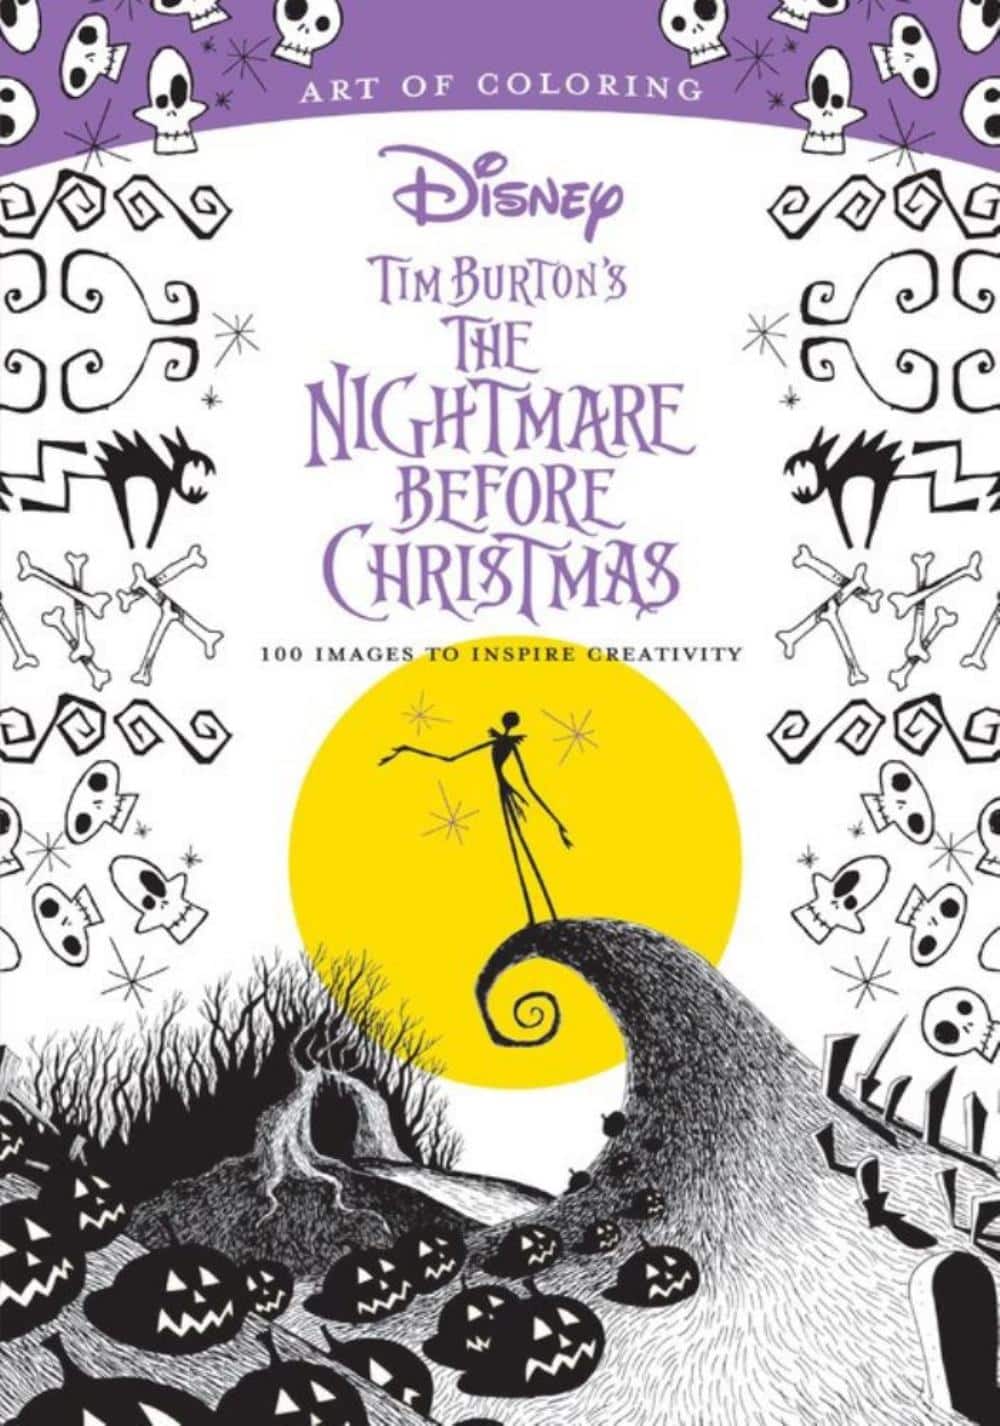 Art Of Coloring: Tim Burton's The Nightmare Before Christmas: 100 Images To Inspire Creativity By Disney | Michaels®